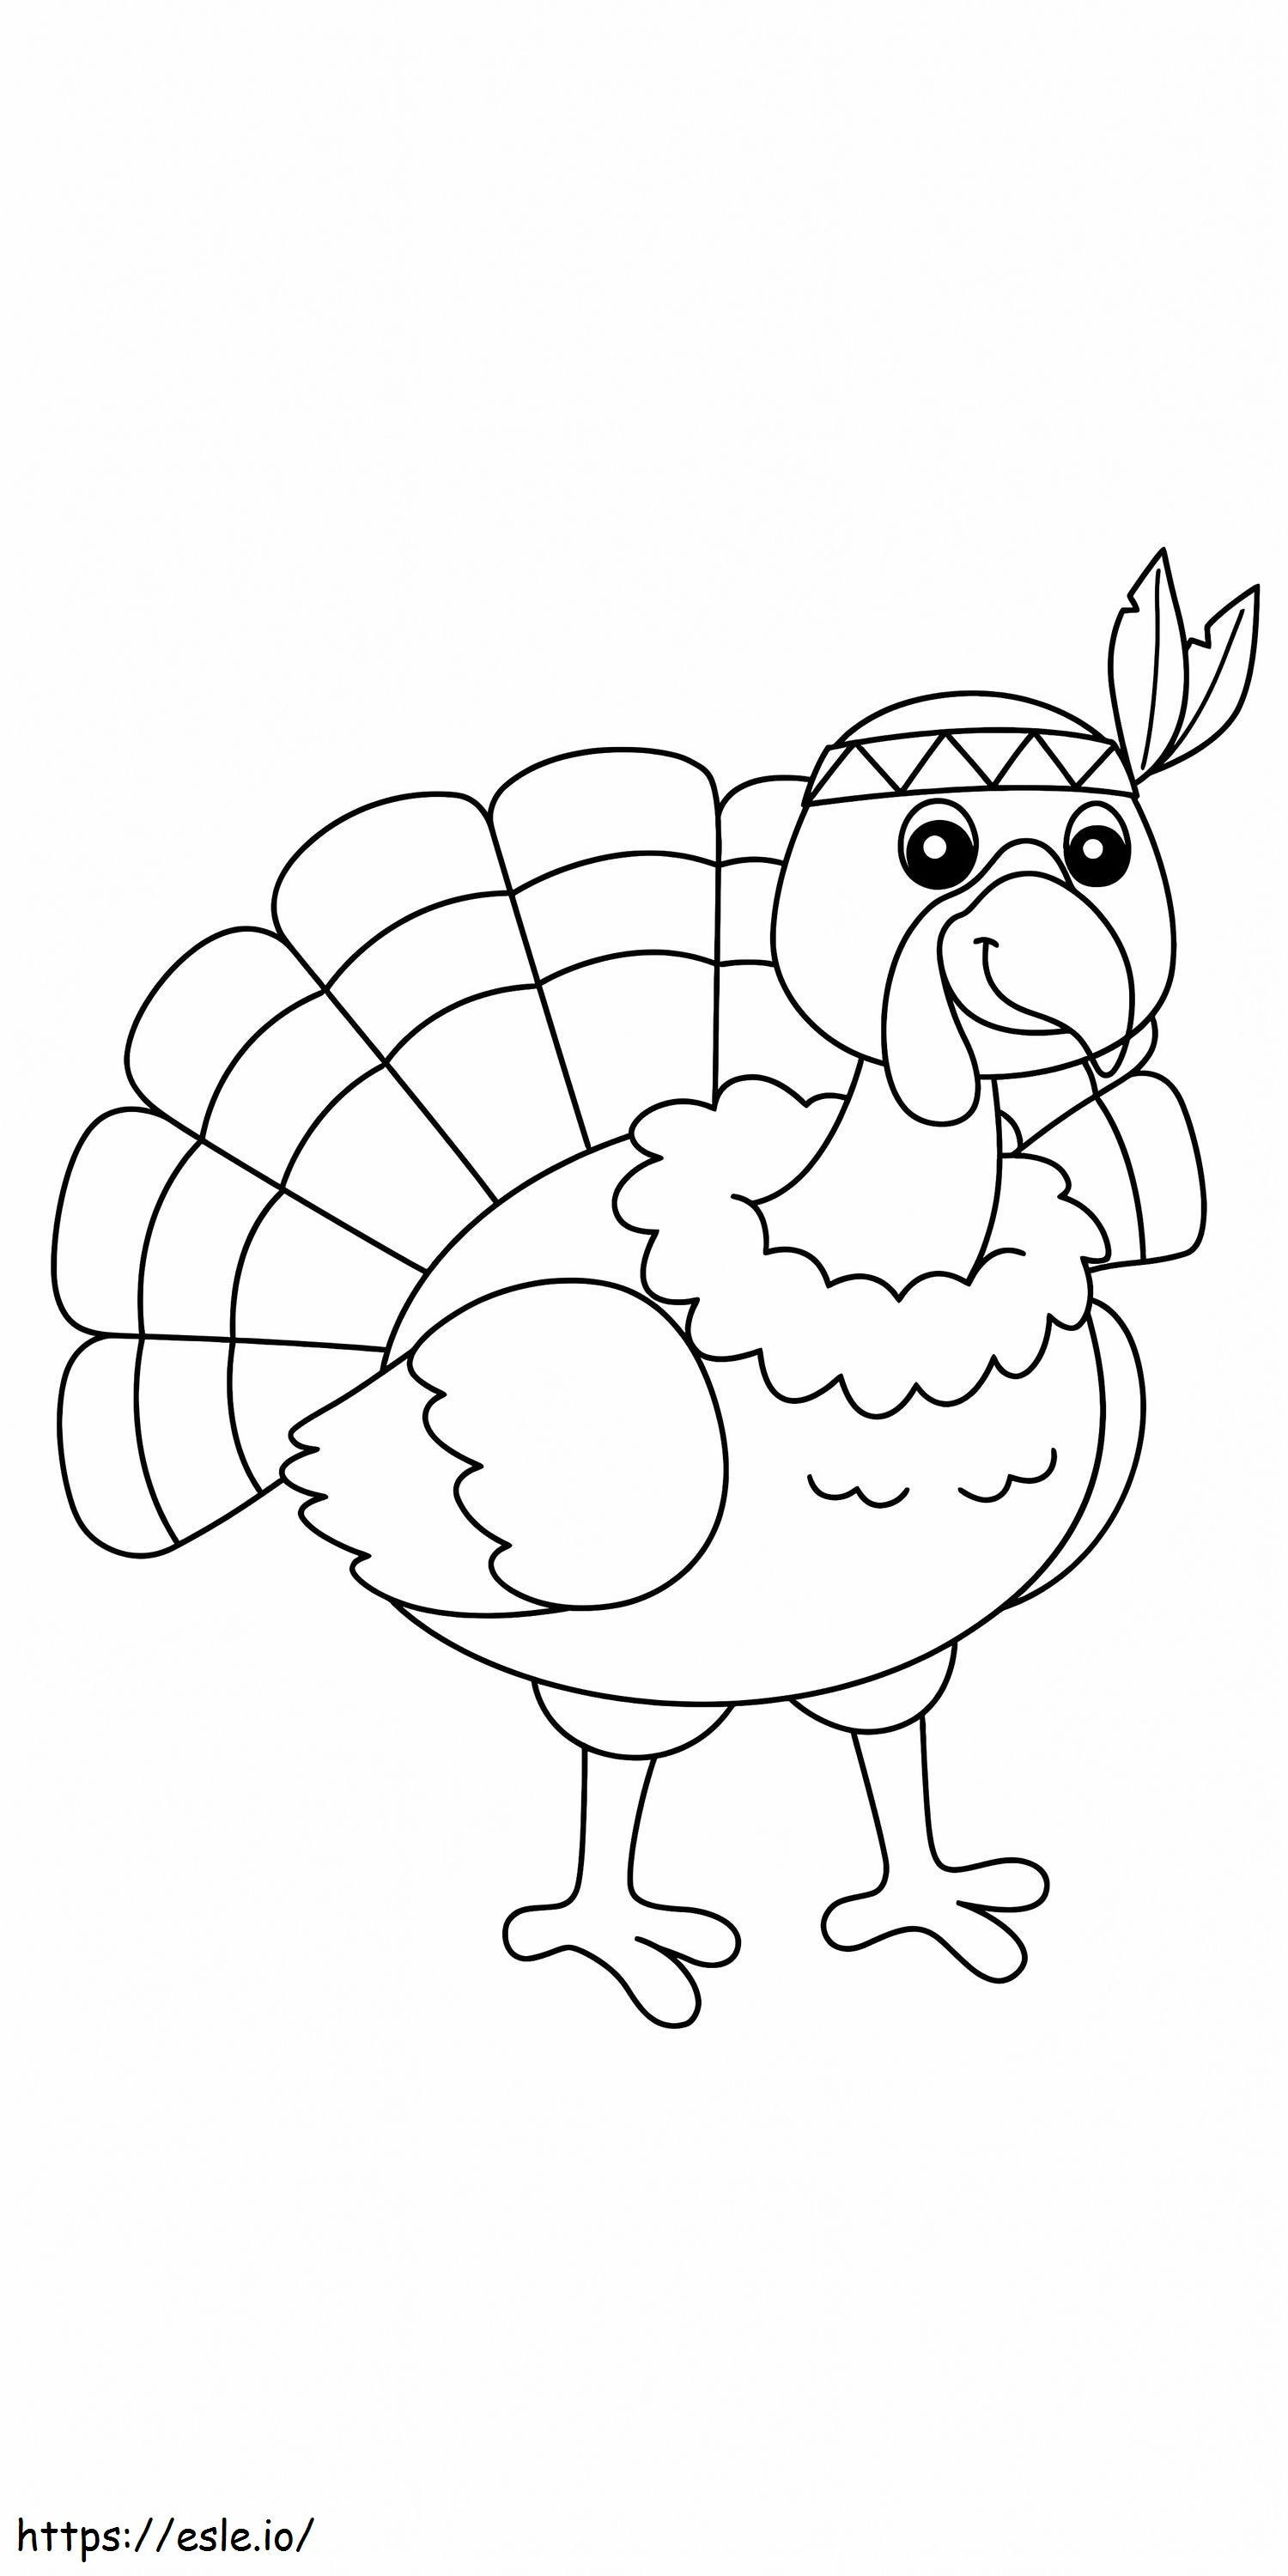 Old Thanksgiving Turkey coloring page